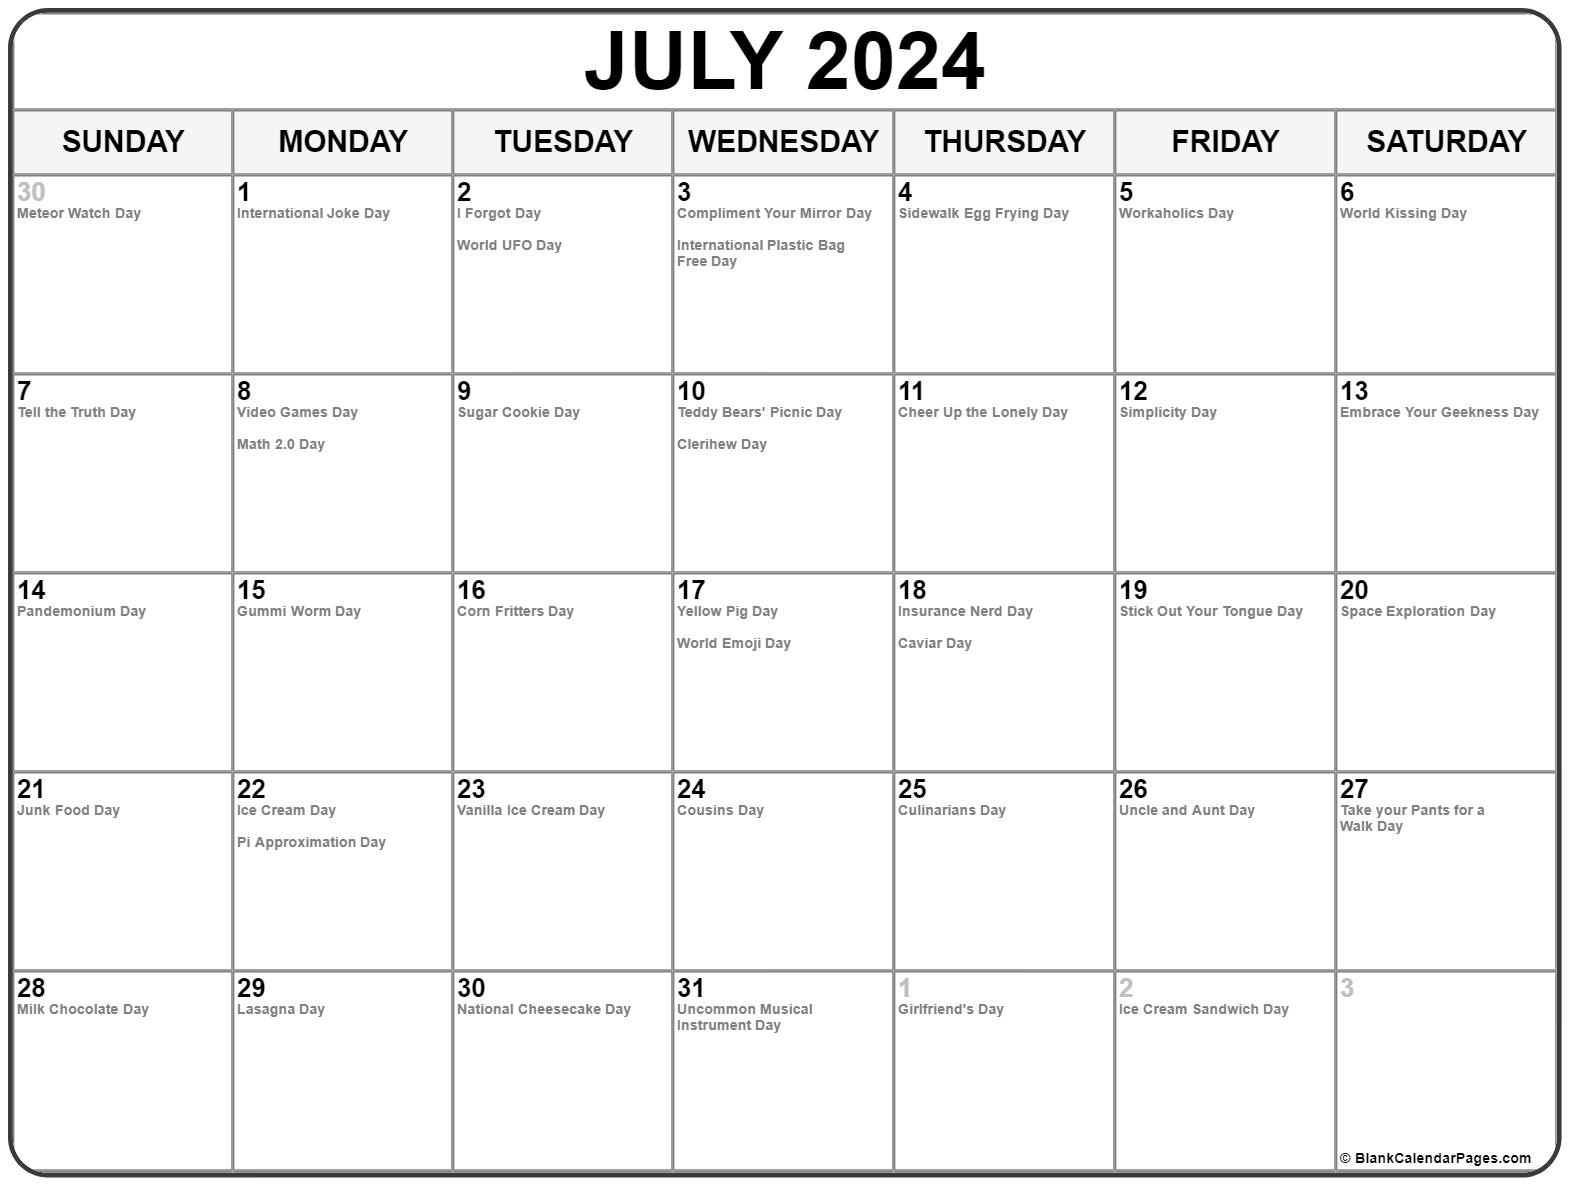 July 2024 With Holidays Calendar intended for July 6th Holiday Calendar 2024